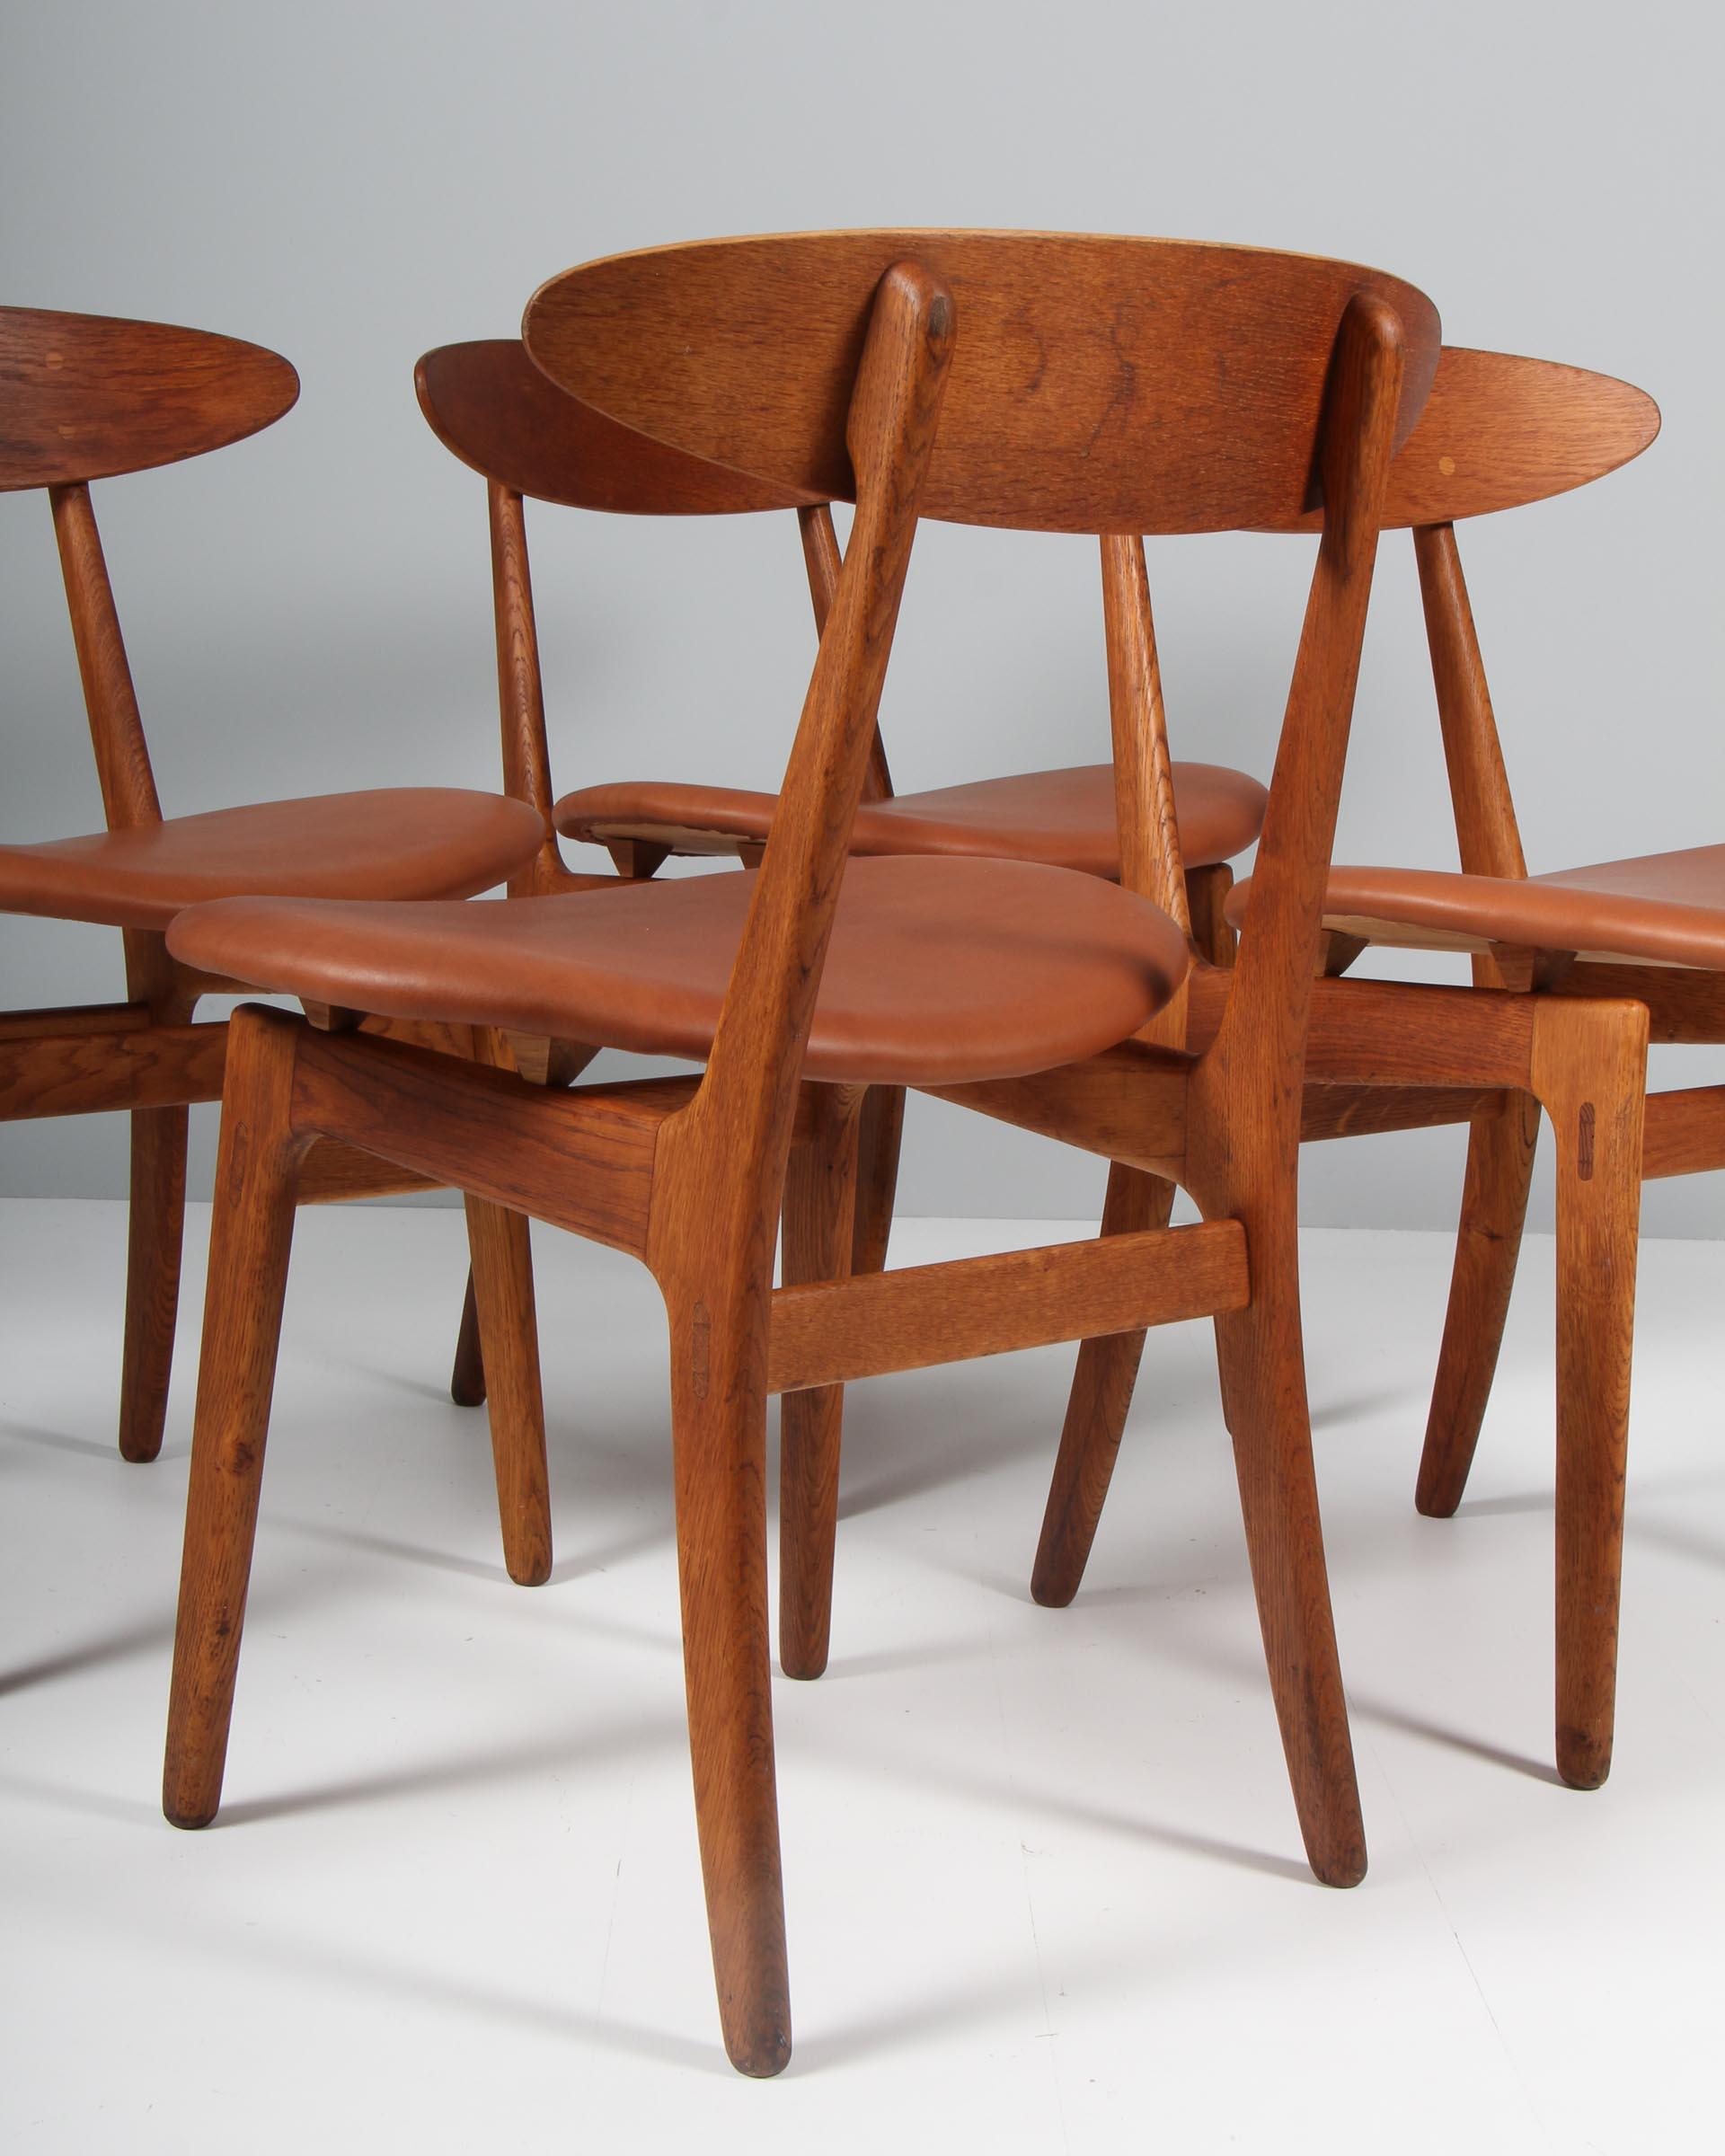 Mid-20th Century Vilhelm Wohlert Dining Chairs in Oak and Aniline Leather, Denmark, 1960's For Sale